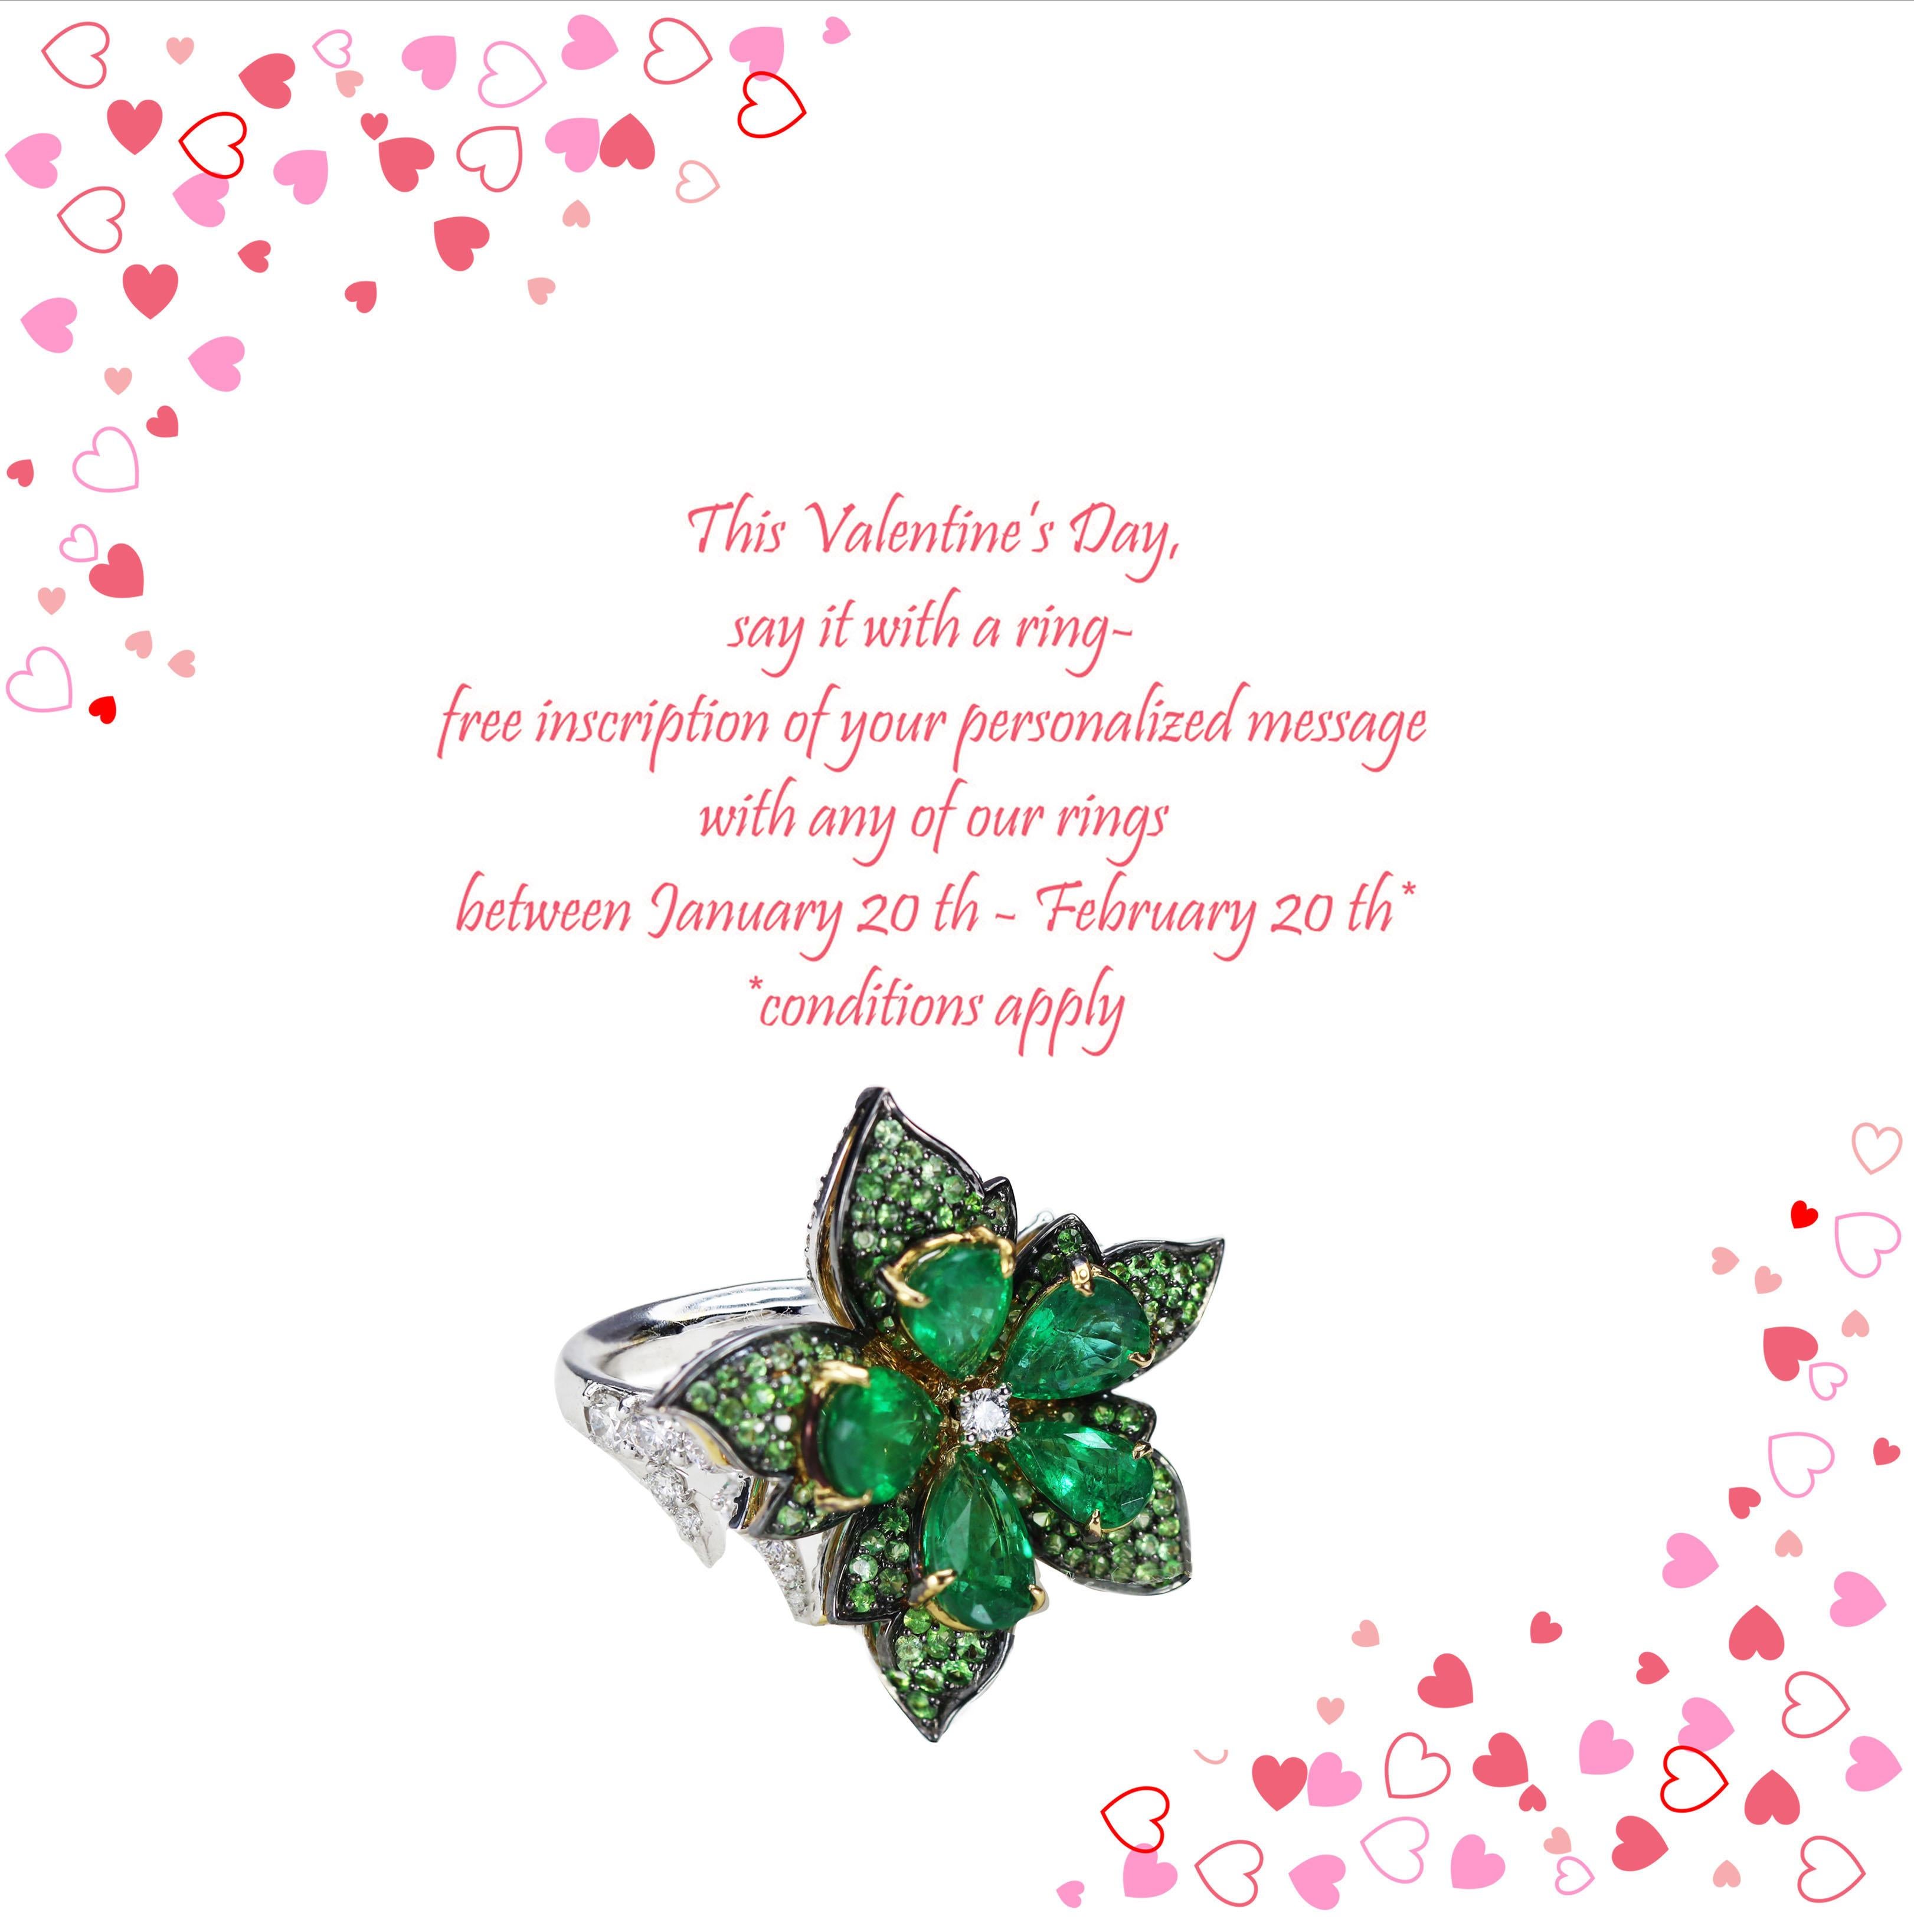 This Valentine’s Day, say it with a ring- free inscription of your personalized message with any of our rings between January 20 th - February 20 th* 

G-H/ VS-SI diamonds, emeralds and tsavorite cocktail ring
 
We shine the spotlight on the